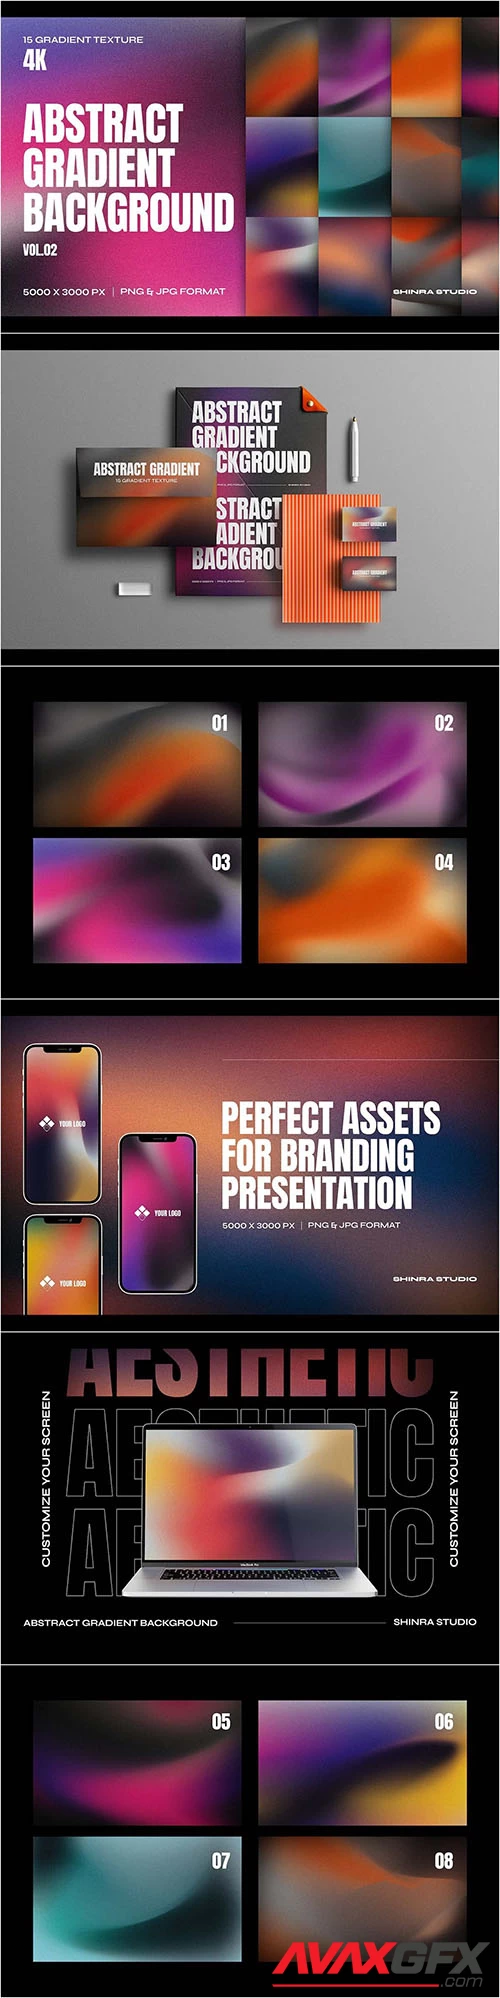 15 Abstract Gradient Background